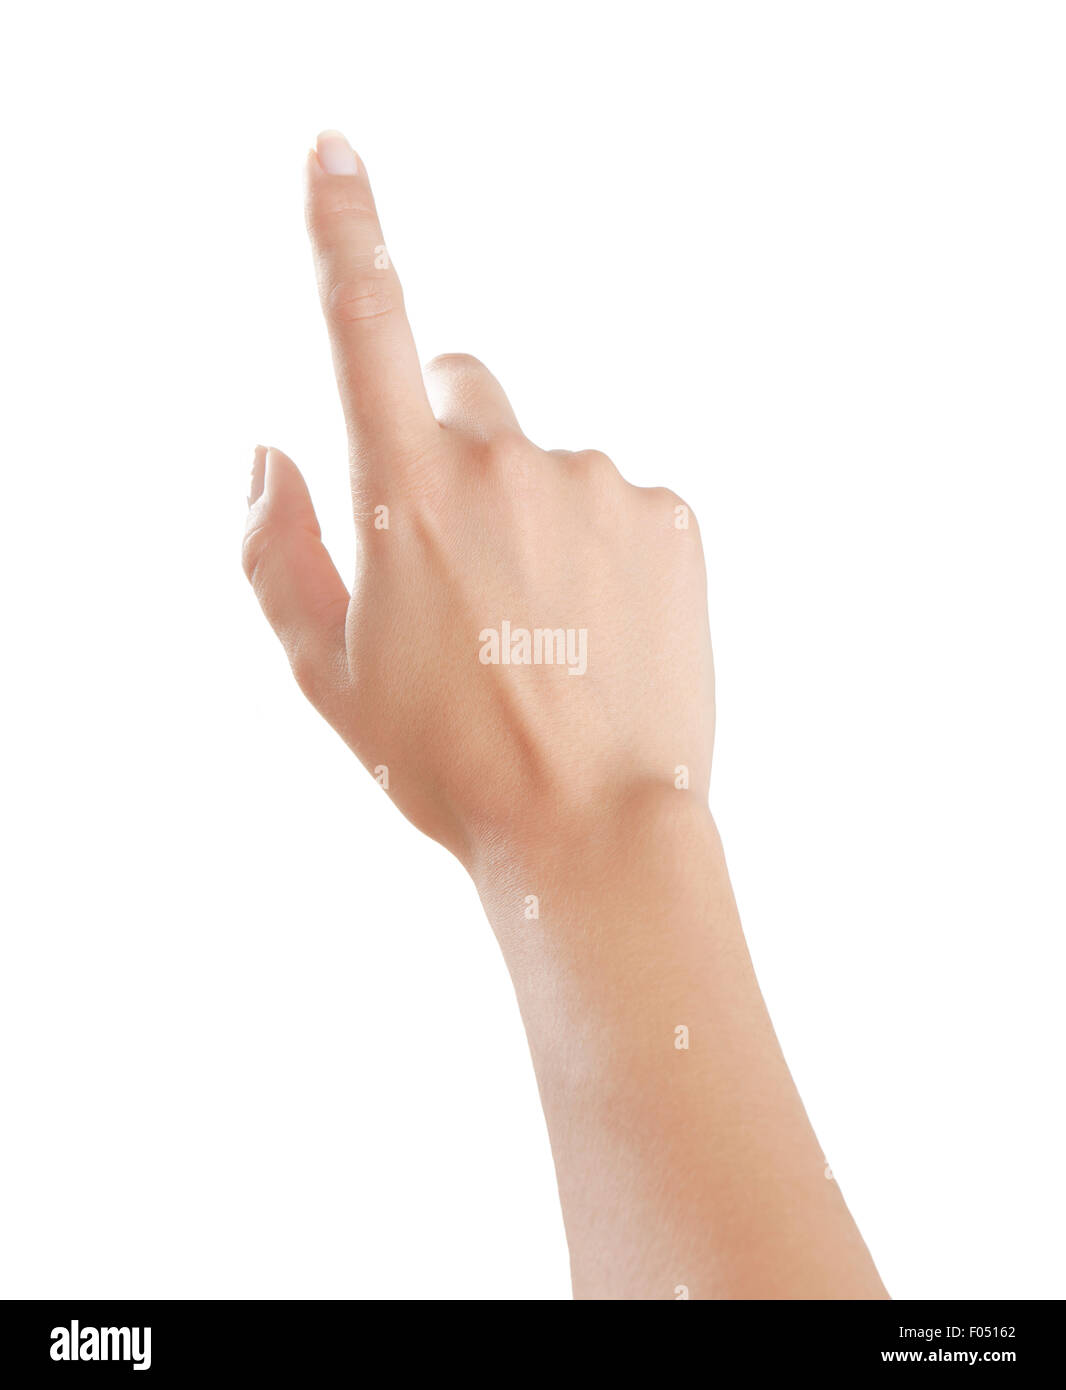 woman hand pointing with his index finger upwards, isolated white background Stock Photo